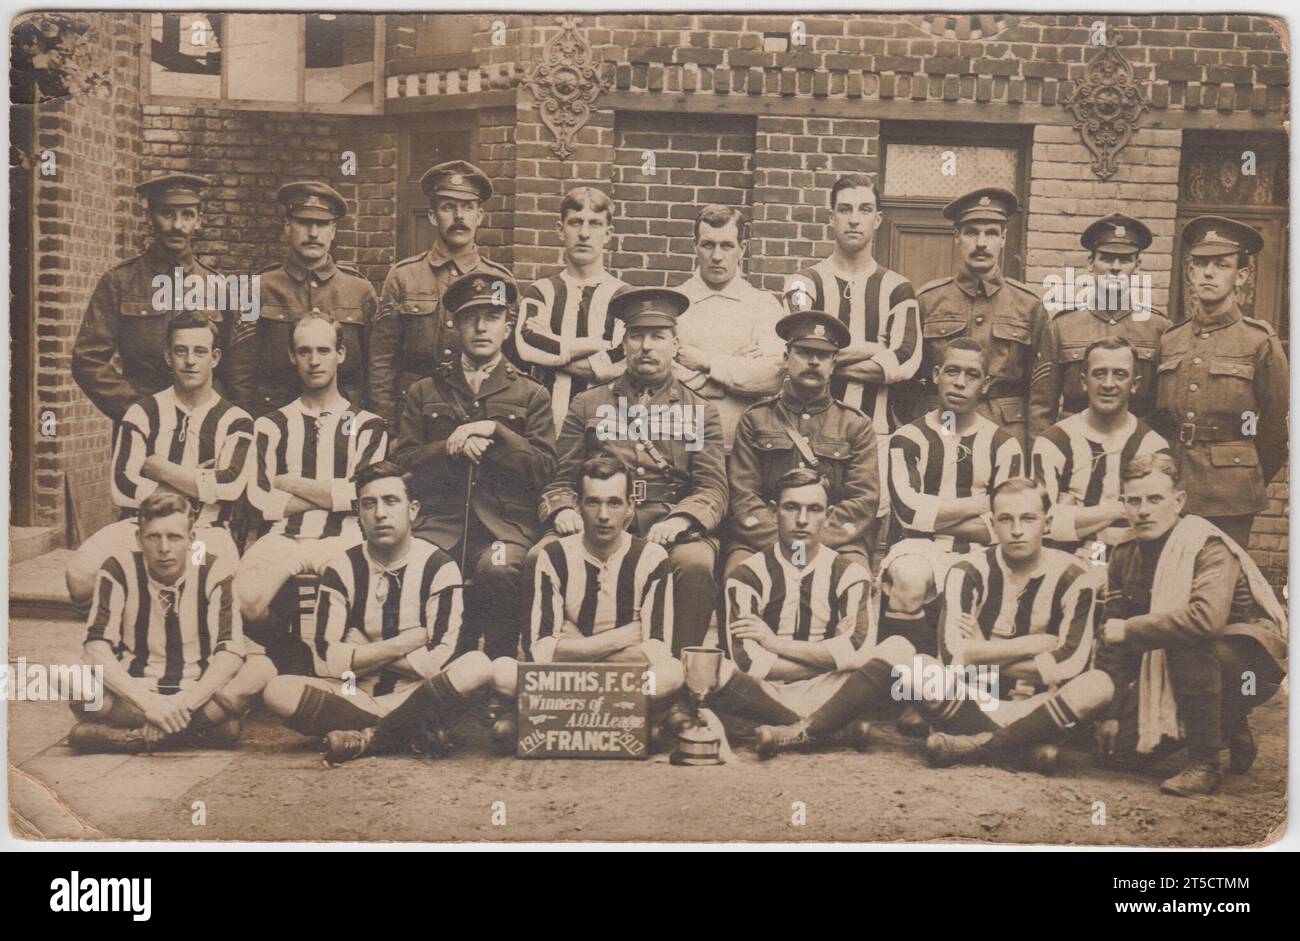 Smiths FC, winners of Army Ordnance Department (AOD) League, France, 1916/7: Team photograph of a First World War army football team. It shows a group of men, some in football kit, others in army uniform, posing with a league cup outside a slightly damaged brick building. One of the players (middle row, second from right) is of African or Caribbean origin, another soldier (top row, far left) may also be of non-European ancestry Stock Photo